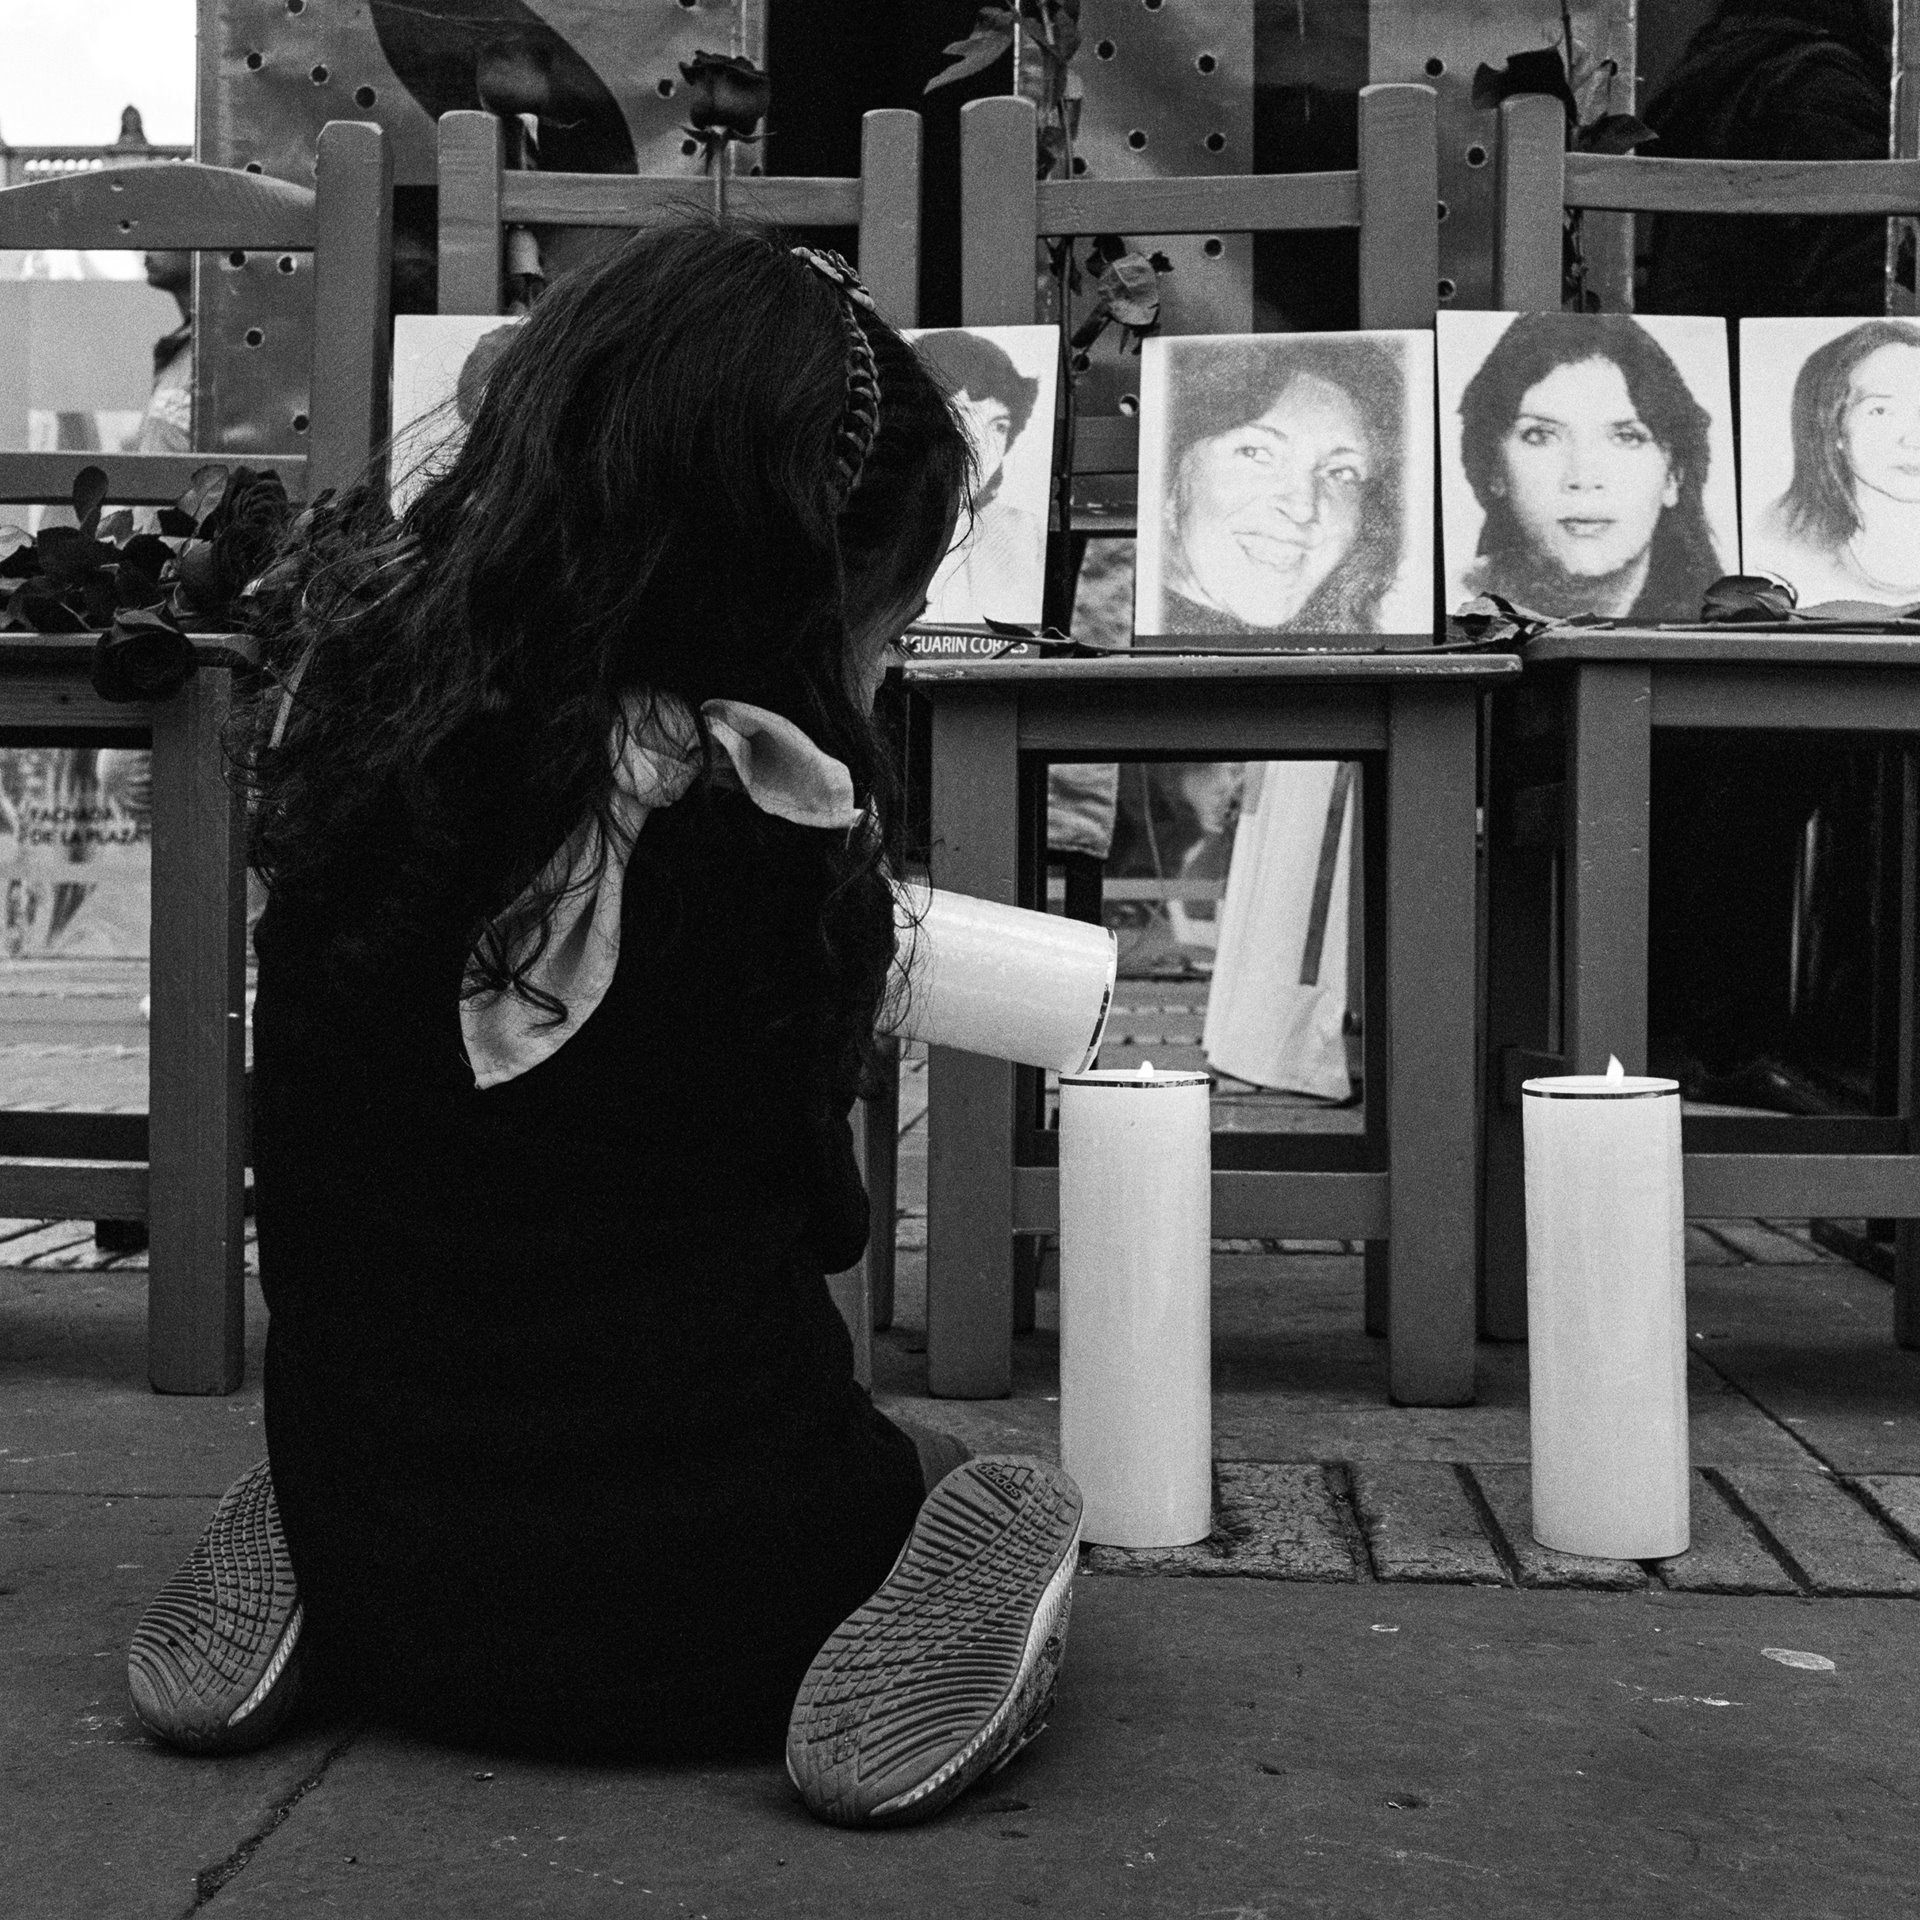 Samantha, granddaughter of Ana Rosa Castiblanco, lights candles during a protest on the 35th anniversary of the siege of the Palace of Justice in Bogotá, Colombia. Ana Rosa, a kitchen assistant at the Palace of Justice, disappeared during the 1985 siege of the Palace, when she was 32 and pregnant. Her remains were returned to her family in 2017.